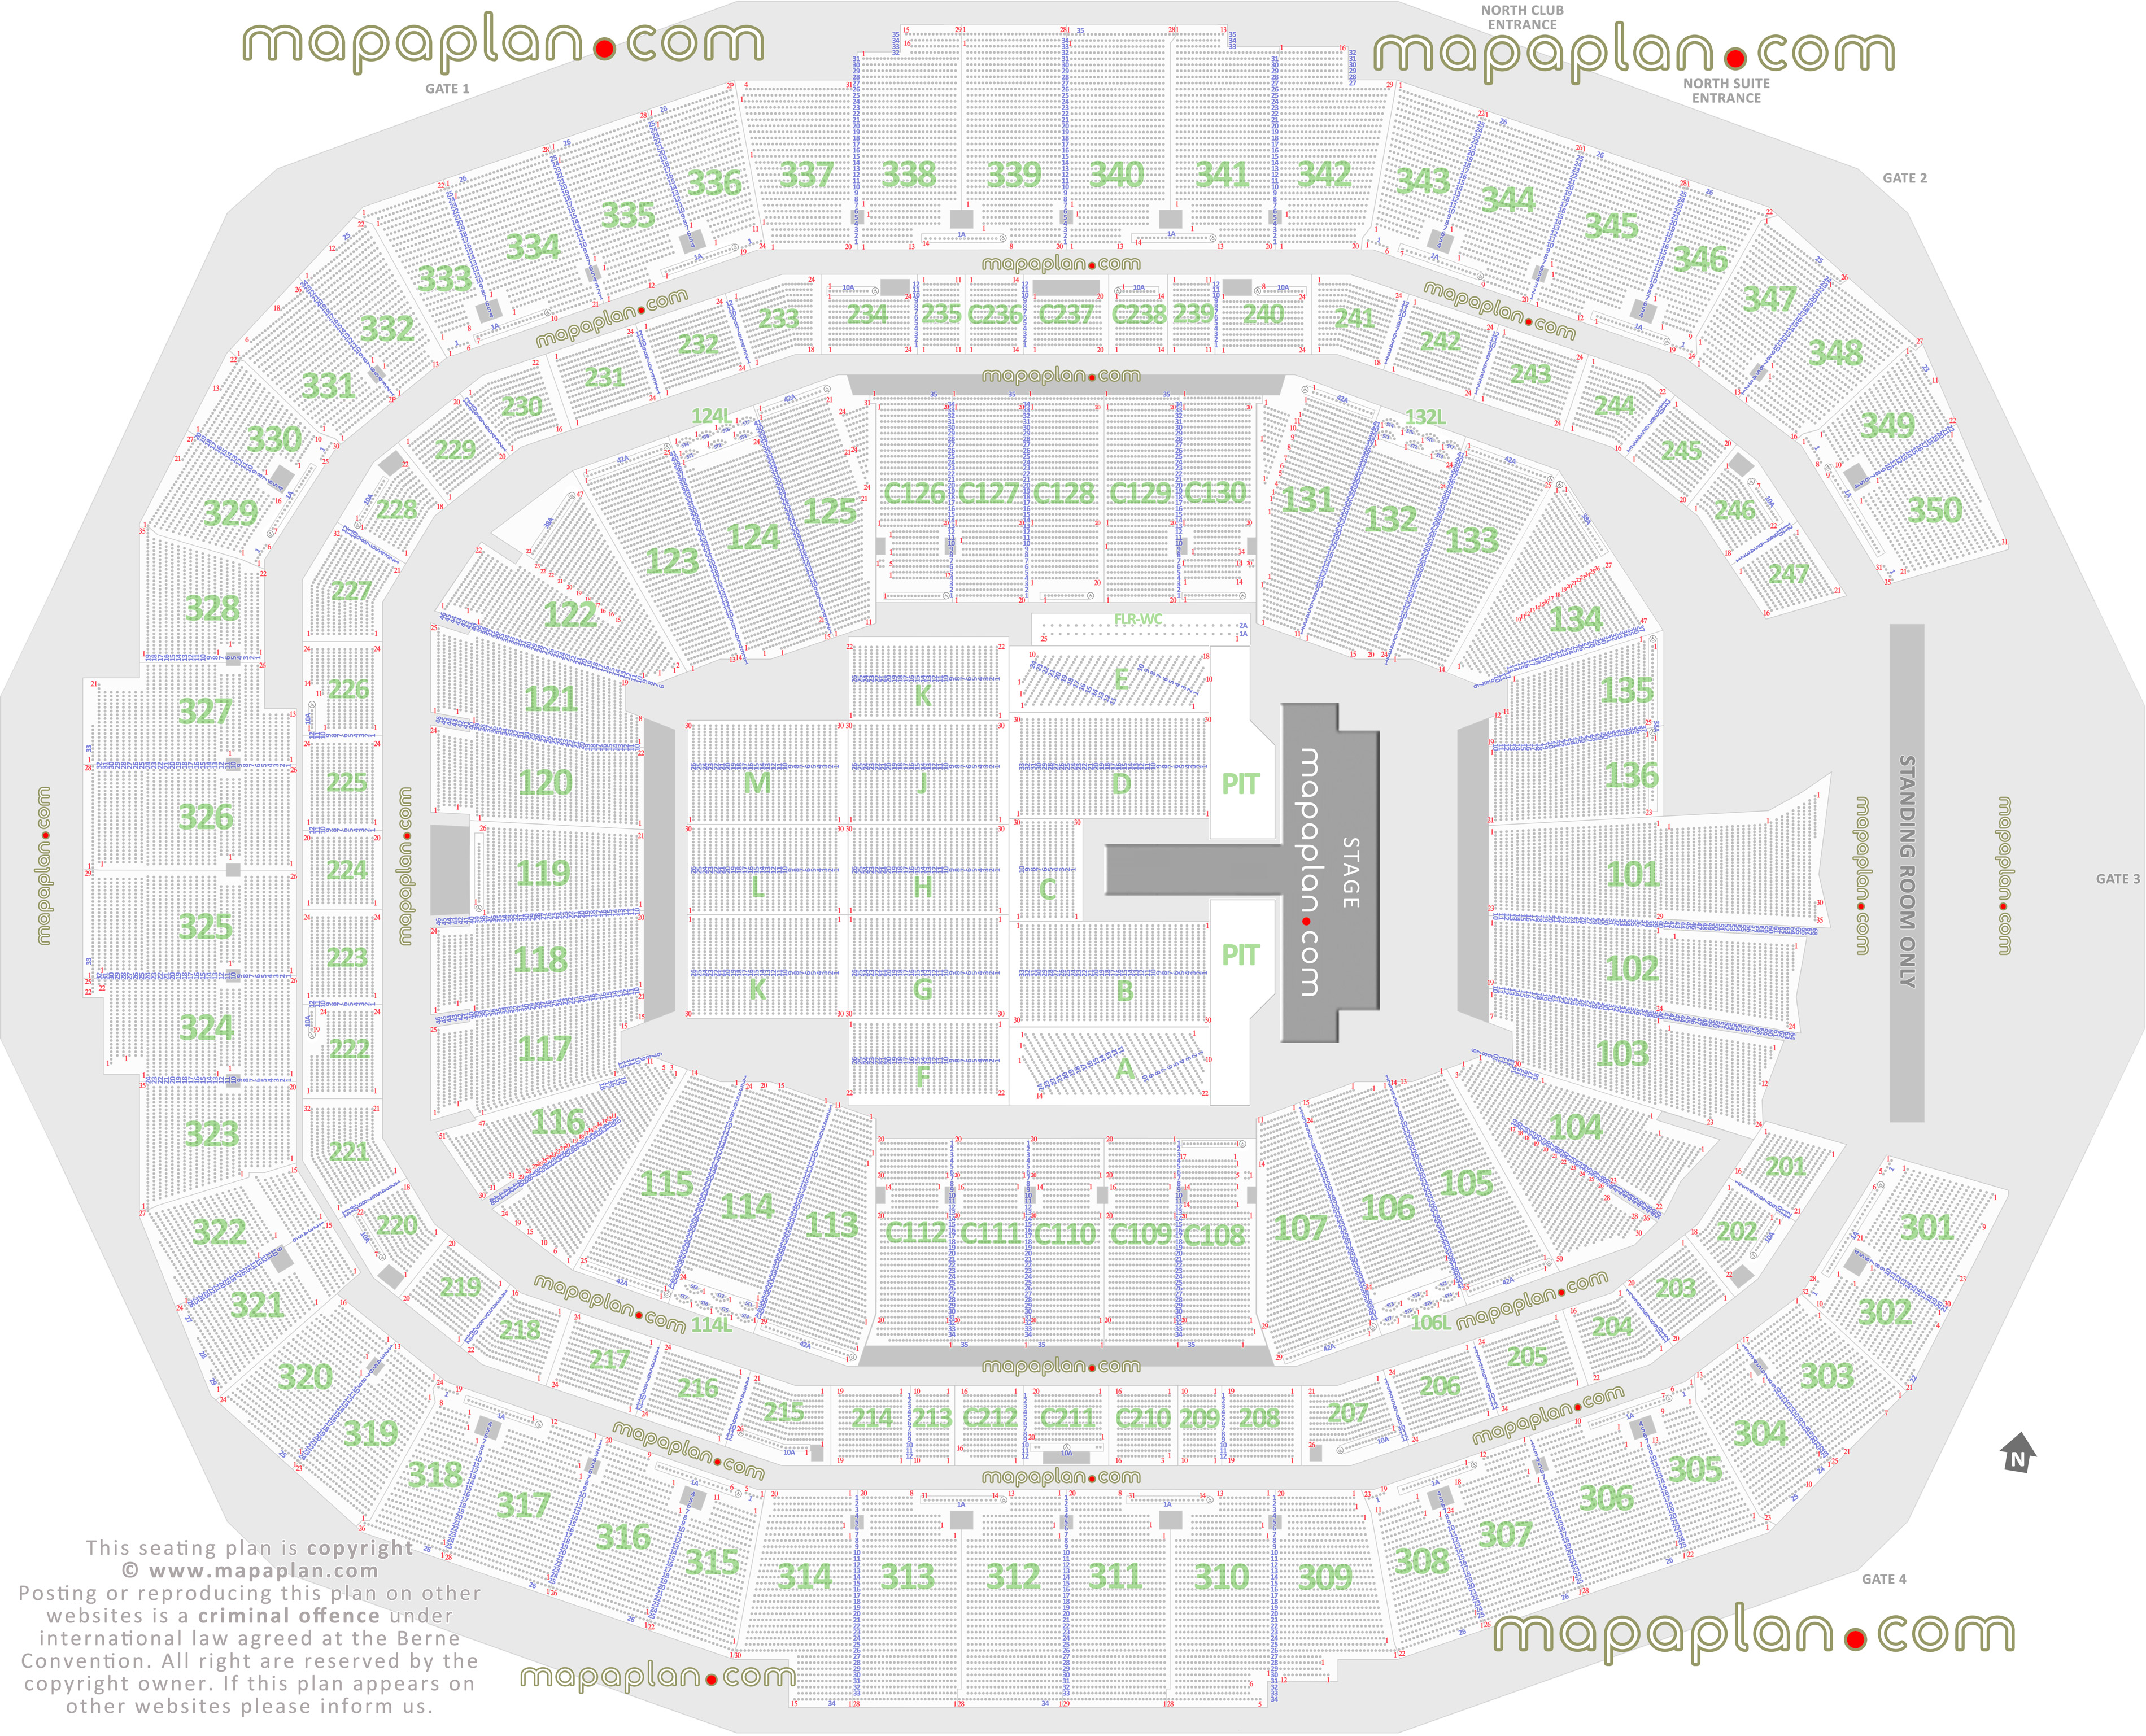 Atlanta Mercedes-Benz Stadium seating chart detailed seat numbers row numbering concert chart interactive plan layout